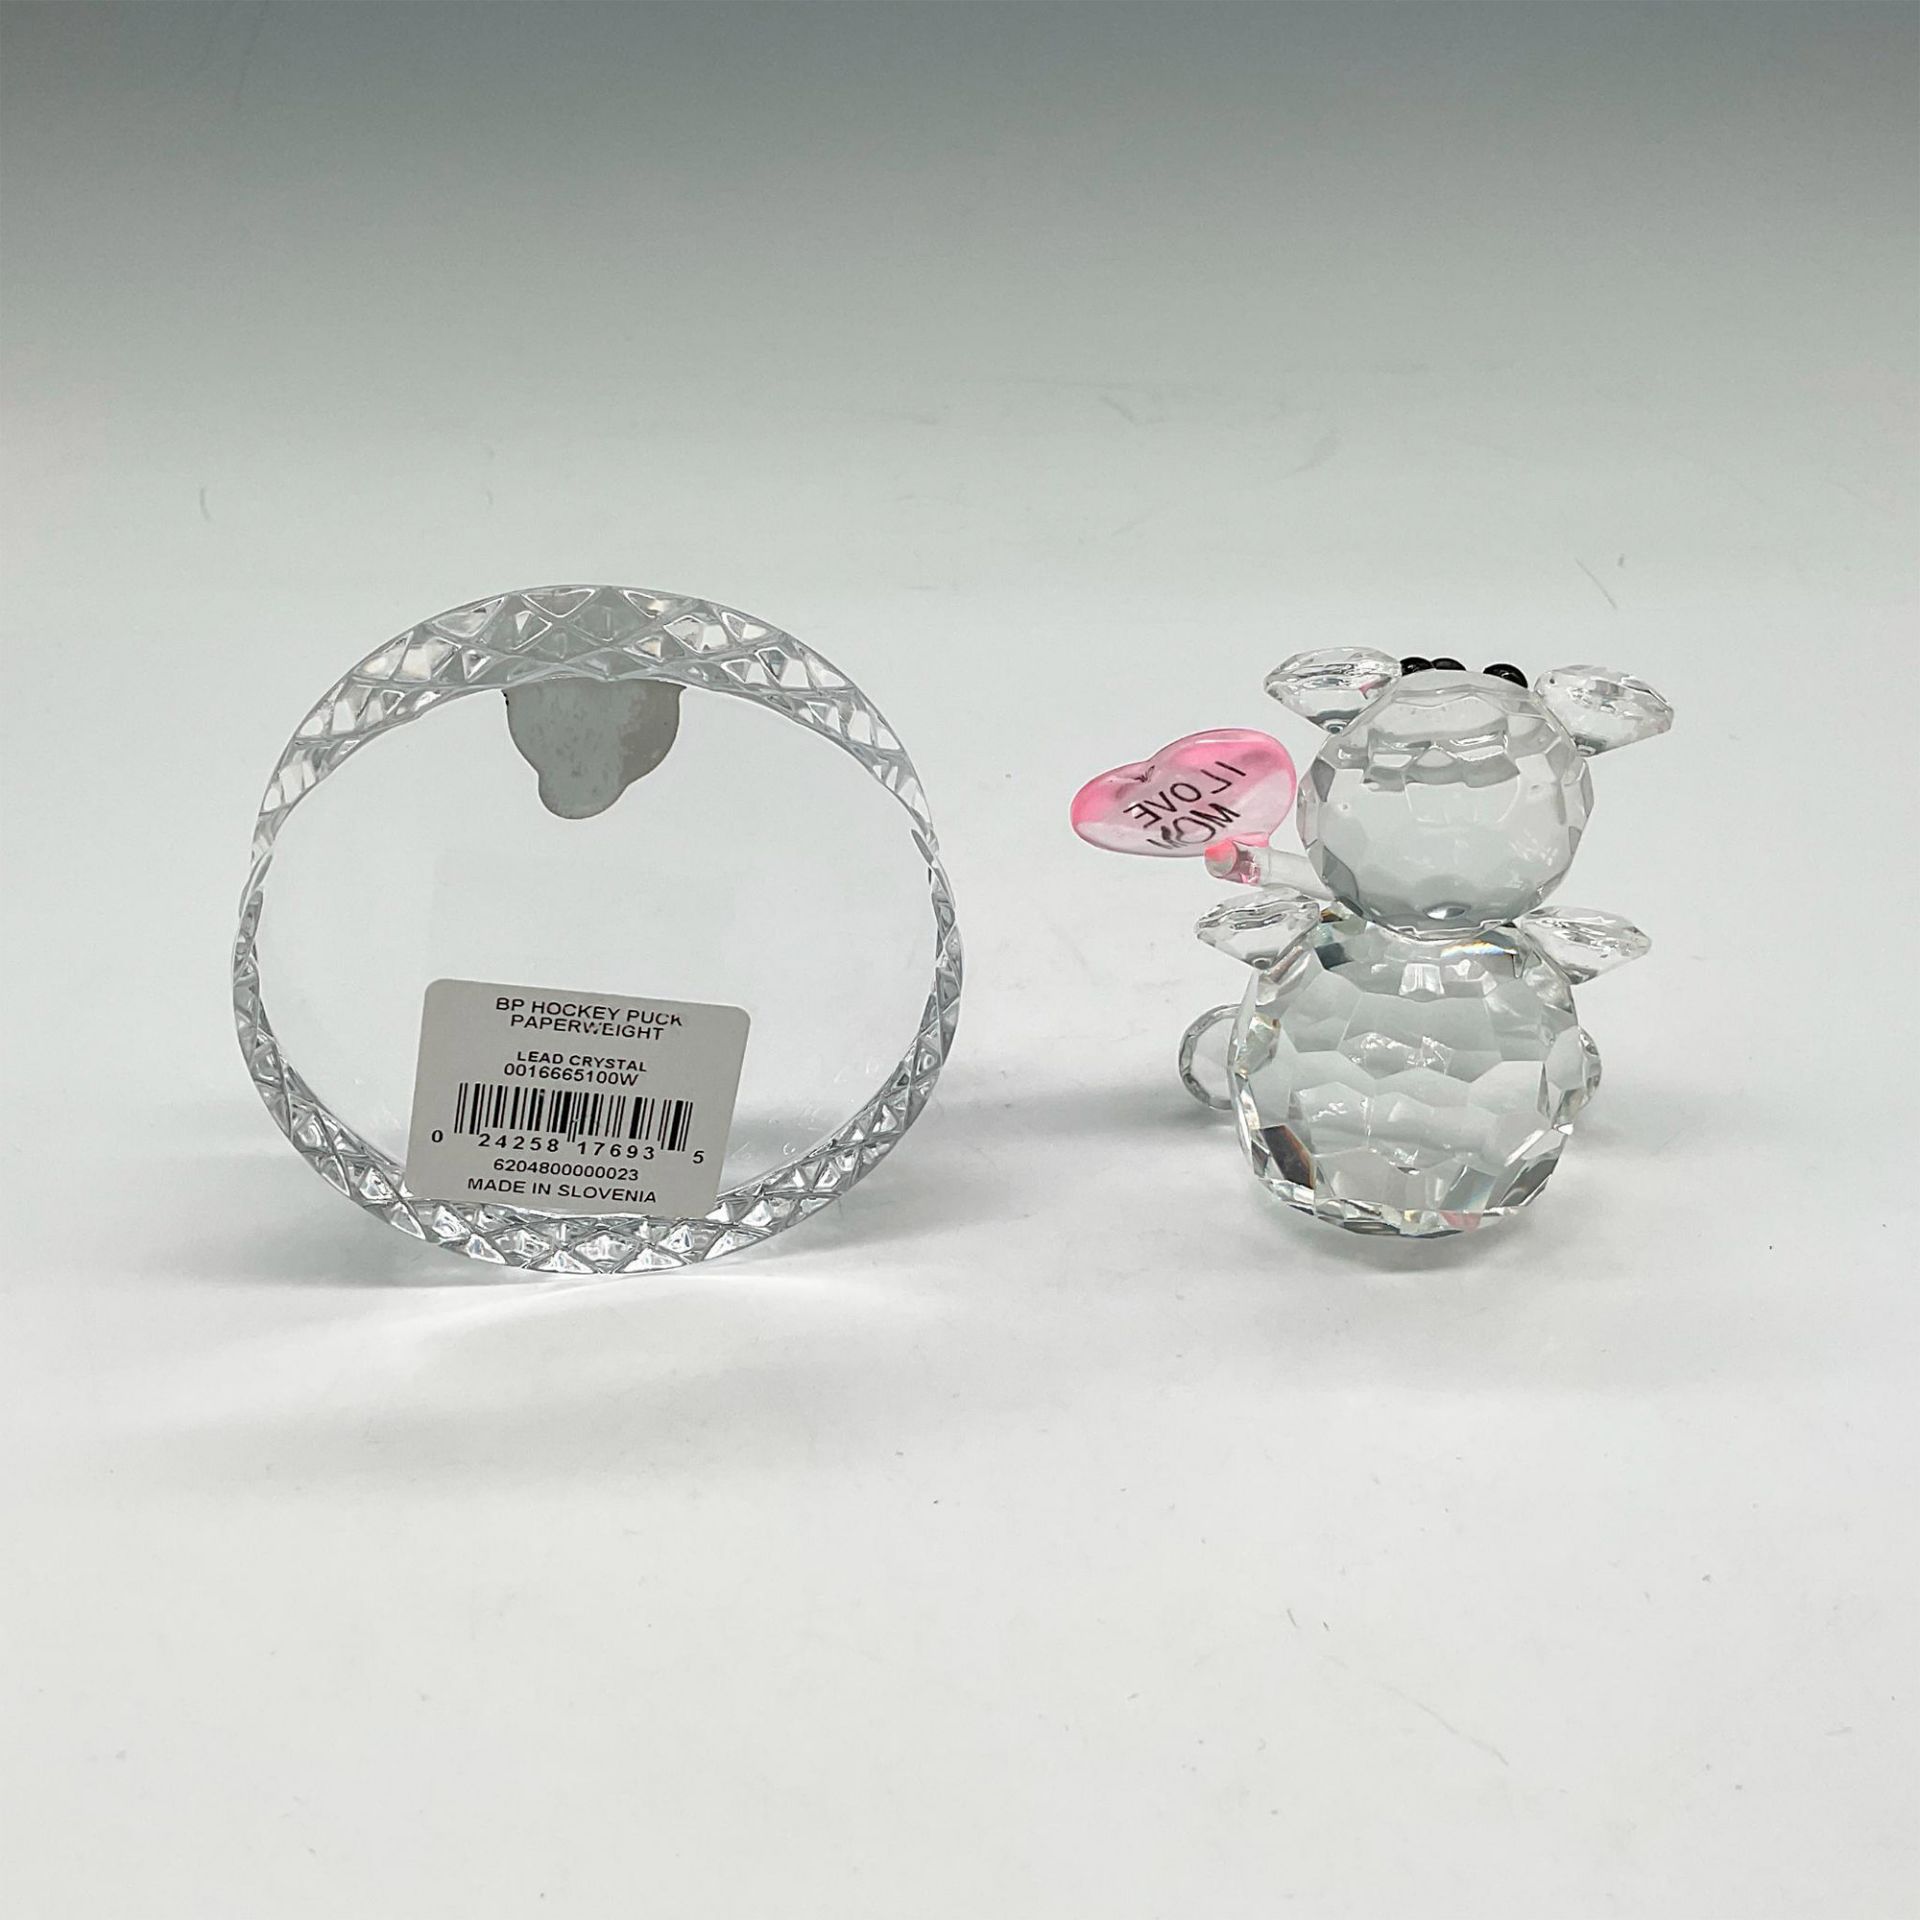 2pc Waterford Crystal Paperweight + Figurine - Image 2 of 3